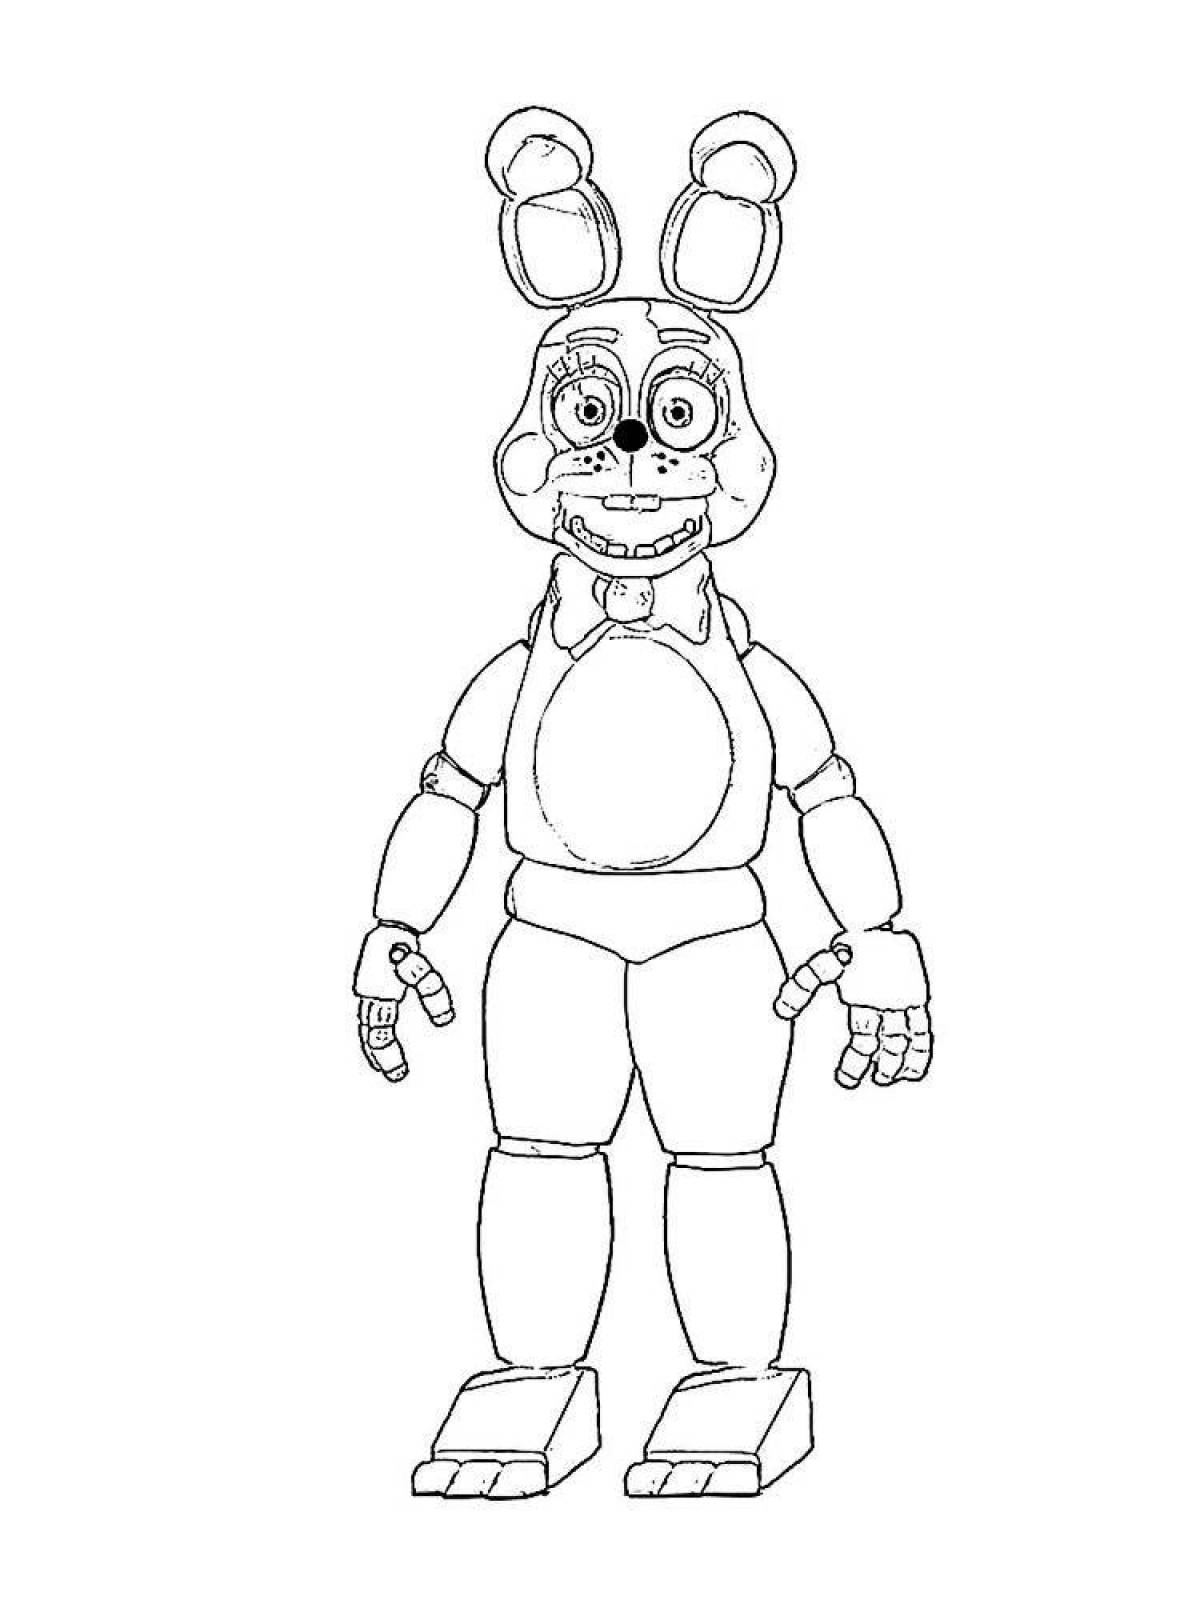 Sunny bonnie coloring page